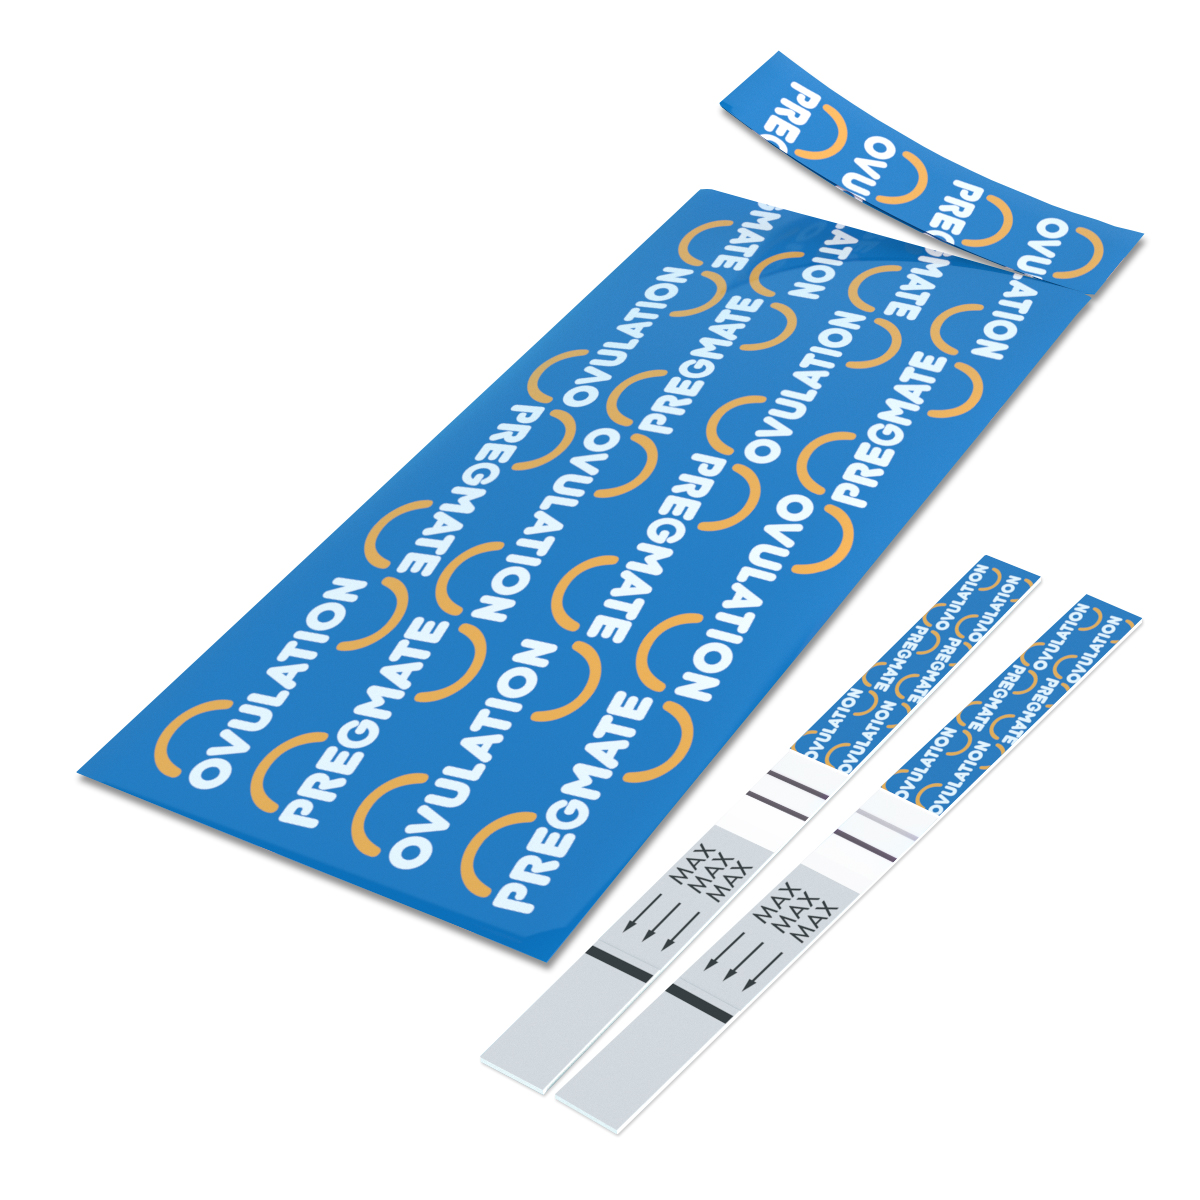 Pregmate 50 Ovulation Test Strips Predictor Kit (50 Count) - image 5 of 10